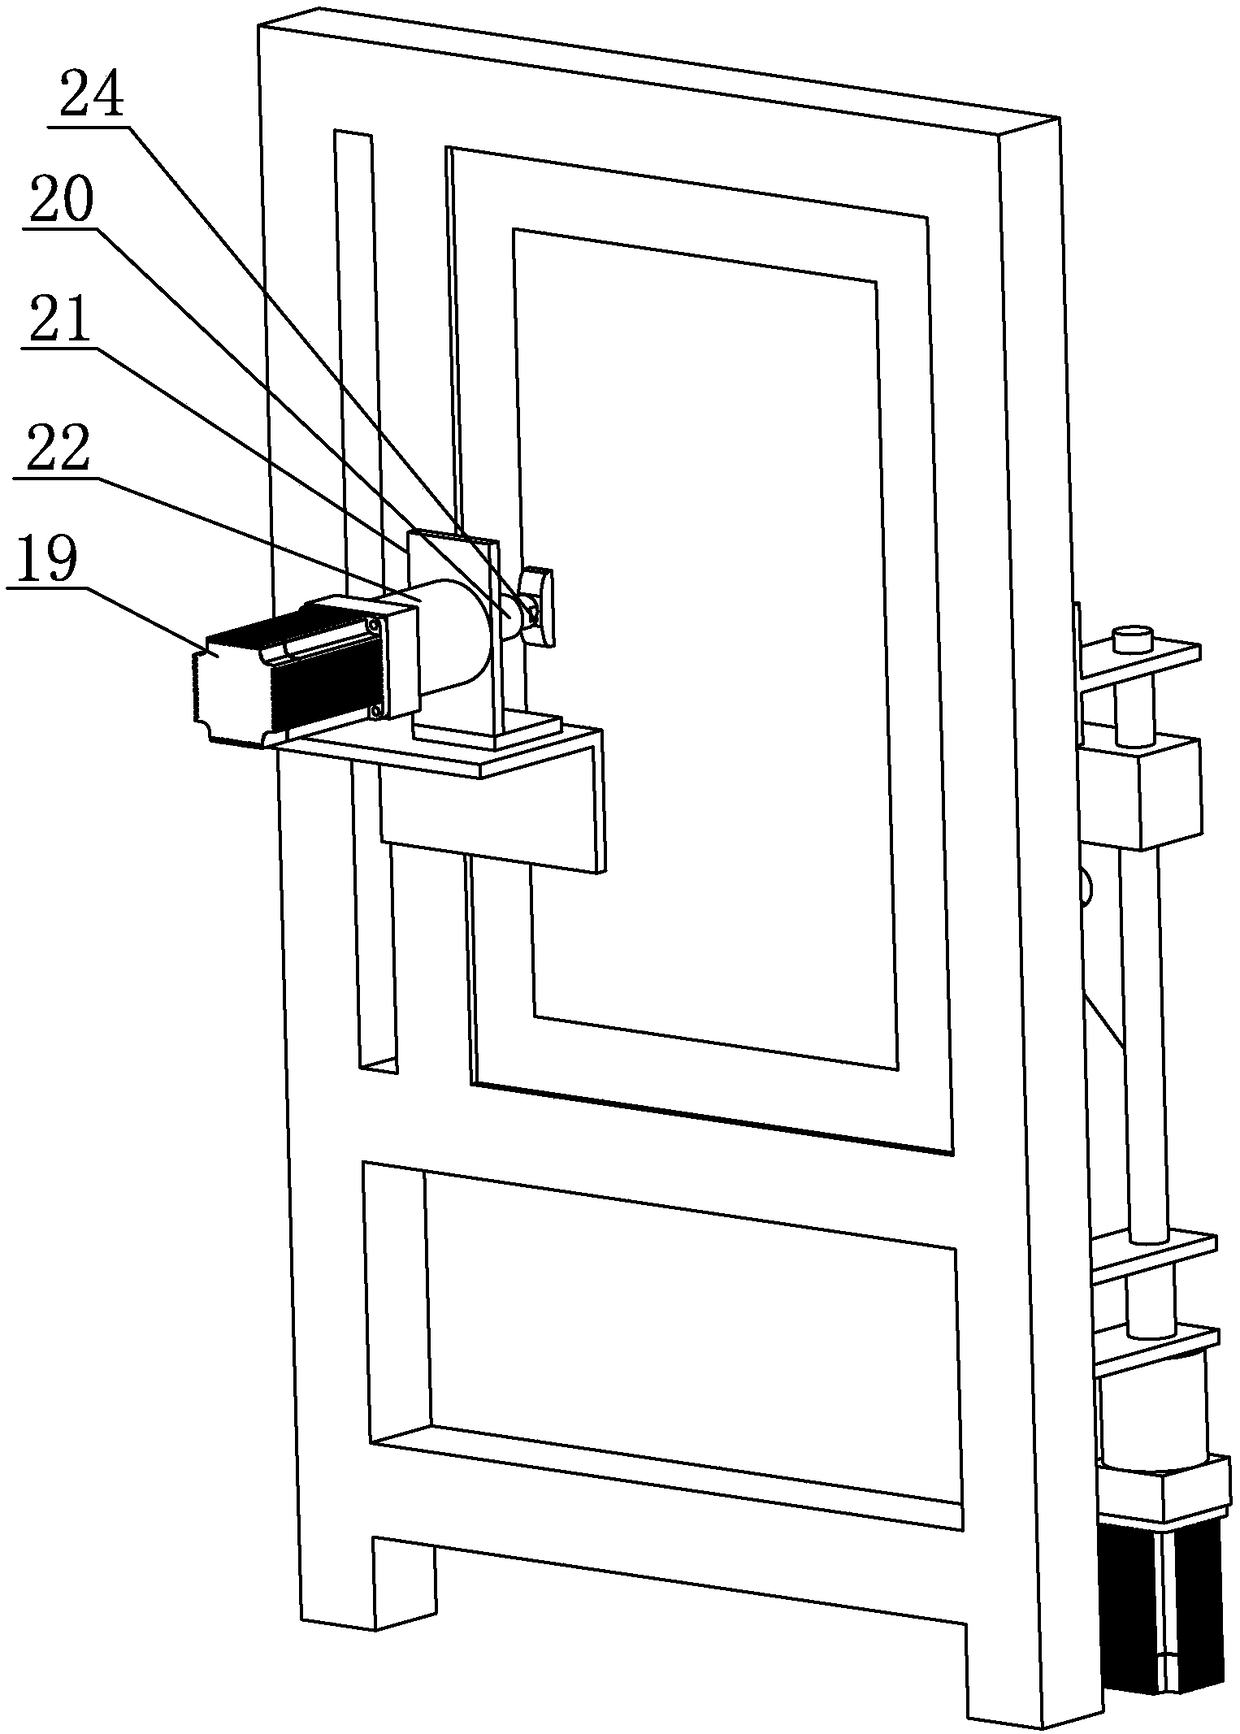 Comprehensive performance tester and test method for in-swinging casement bottom hanging hardware system for building window